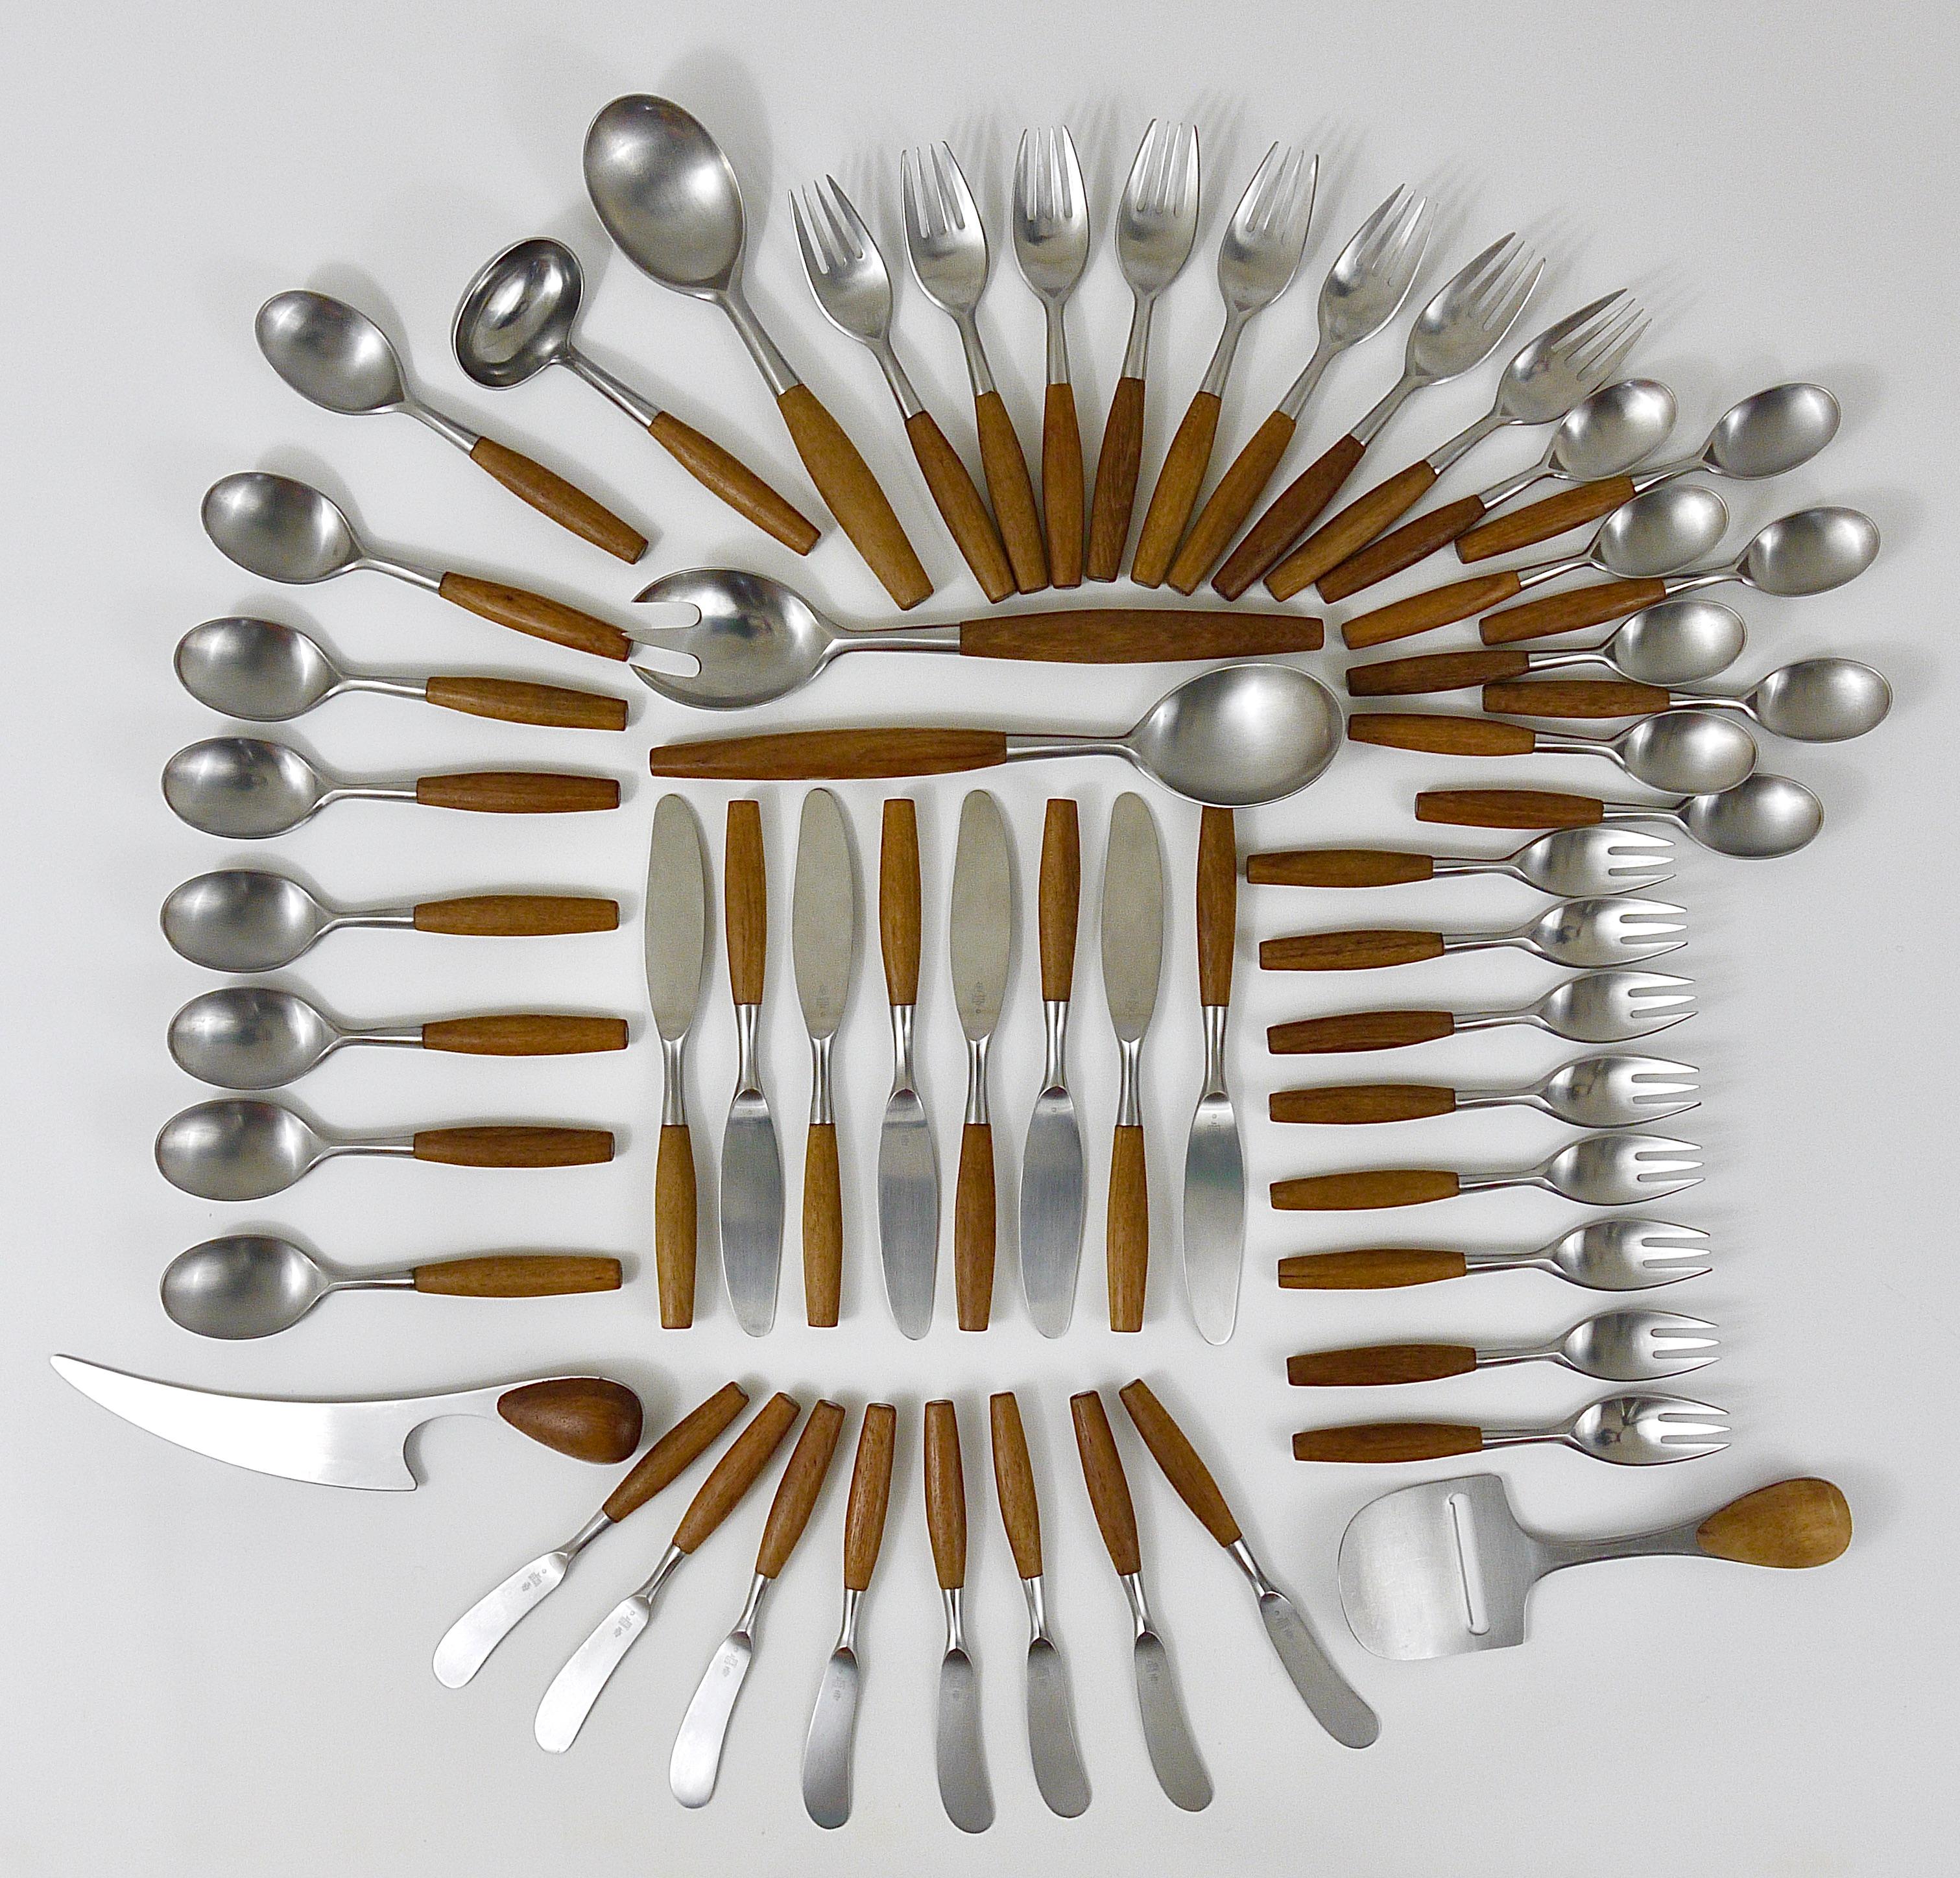 A comprehensive set of midcentury Danish modern flatware, designed in the 1950s by Jens Quistgaard for Dansk. Beautiful and hard-to-find cutlery made of stainless steel with beautiful teak handles, which is part of the collection of the Museum of